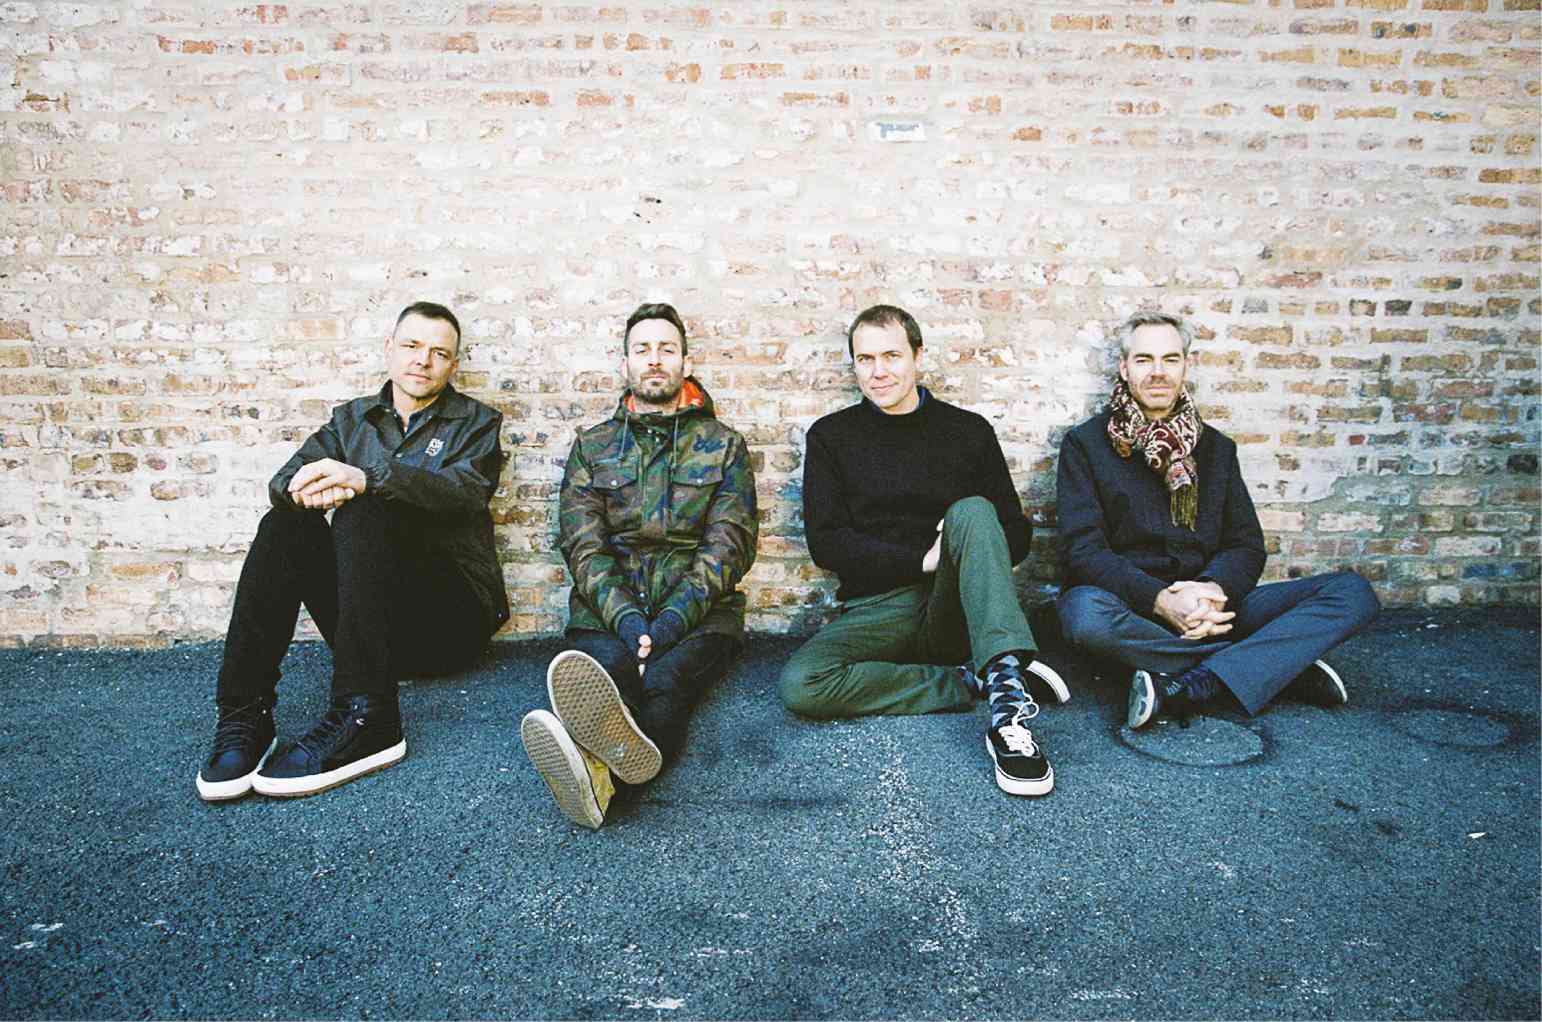 A chat with American Football